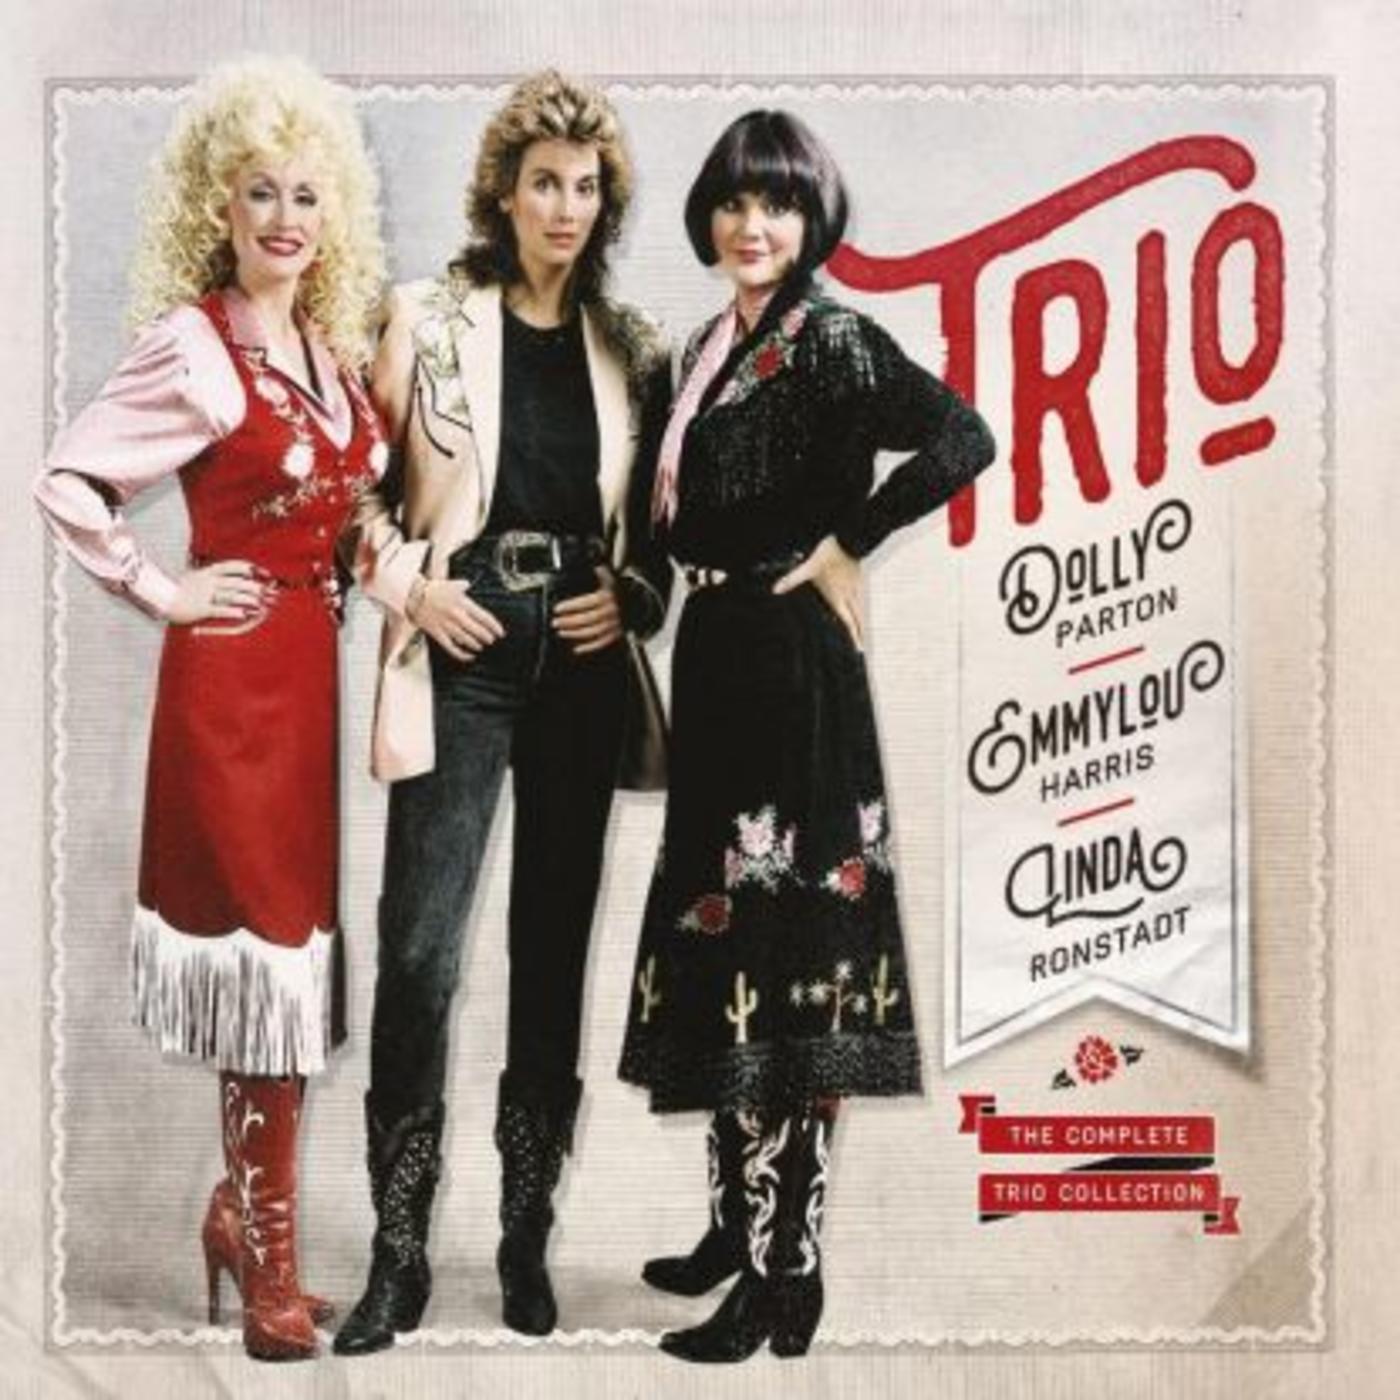 The Complete Trio Collection (Deluxe)